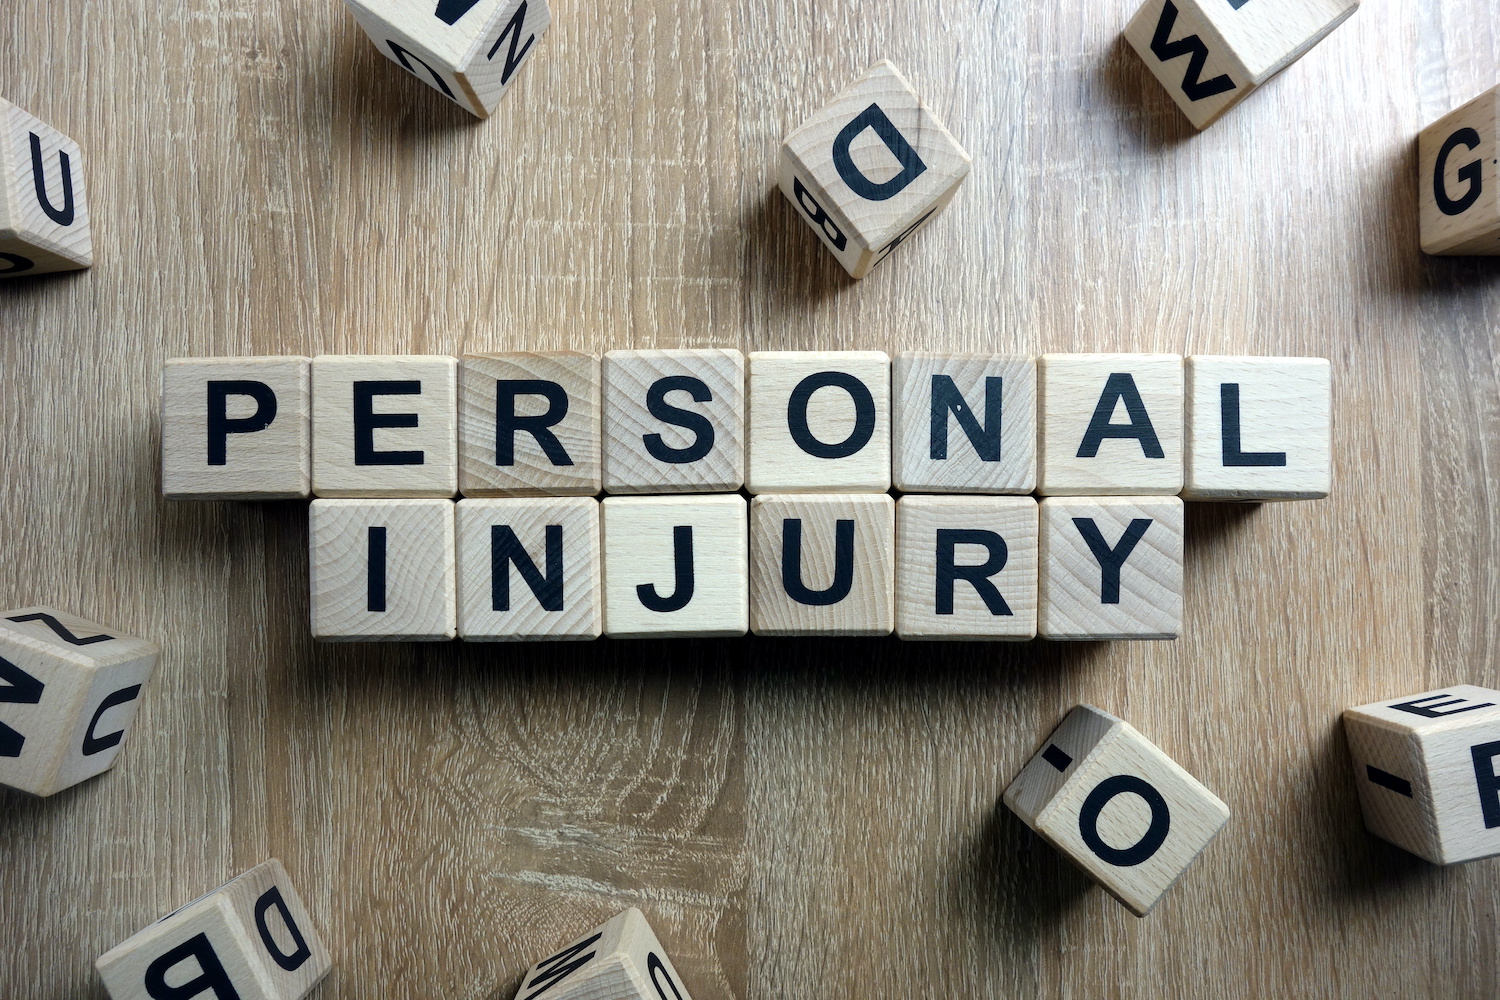 Hire a Personal Injury Lawyer in Boca Raton